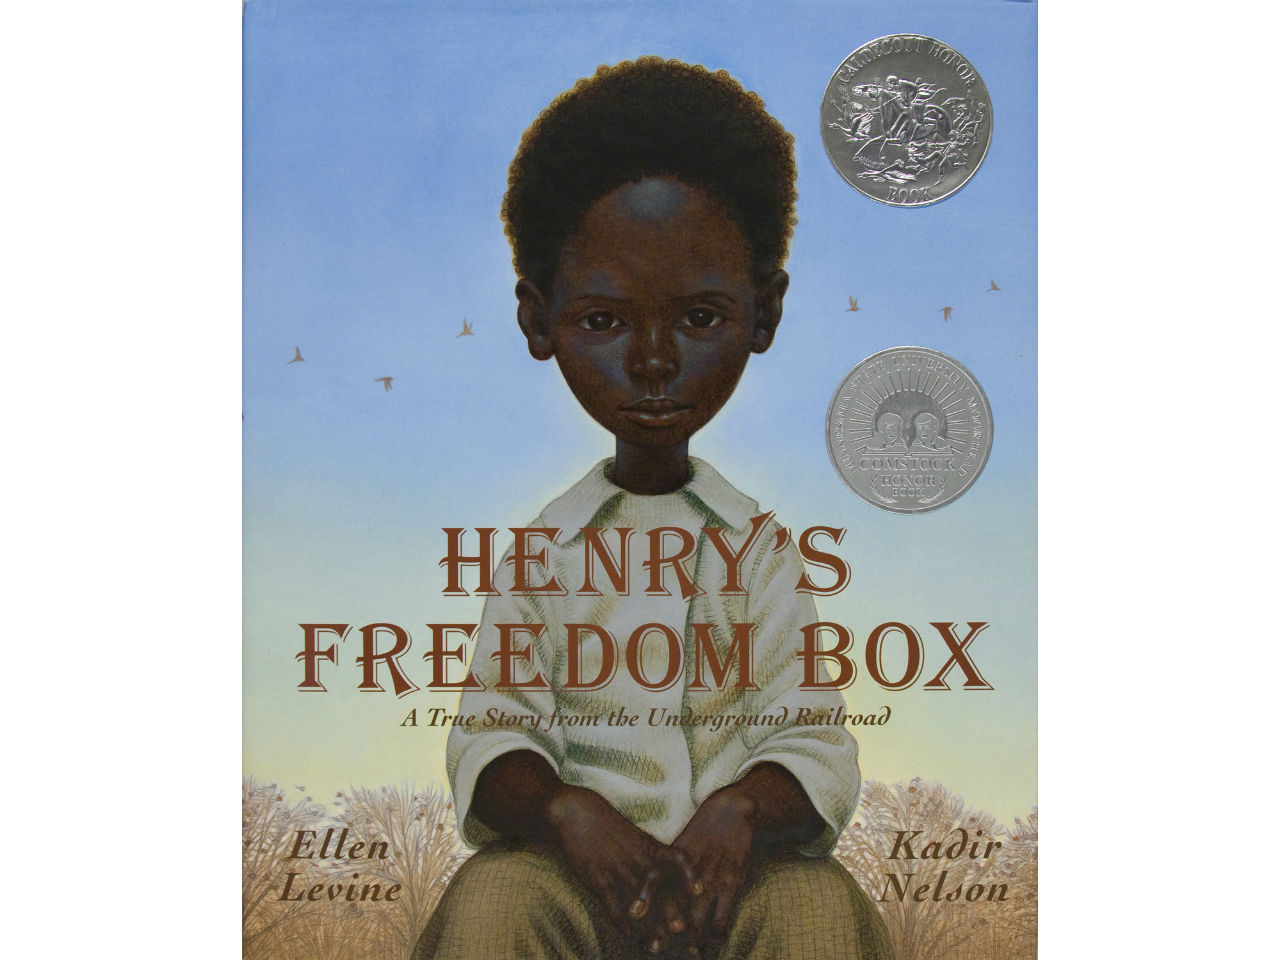 Henry’s Freedom Box: A True Story from the Underground Railroad